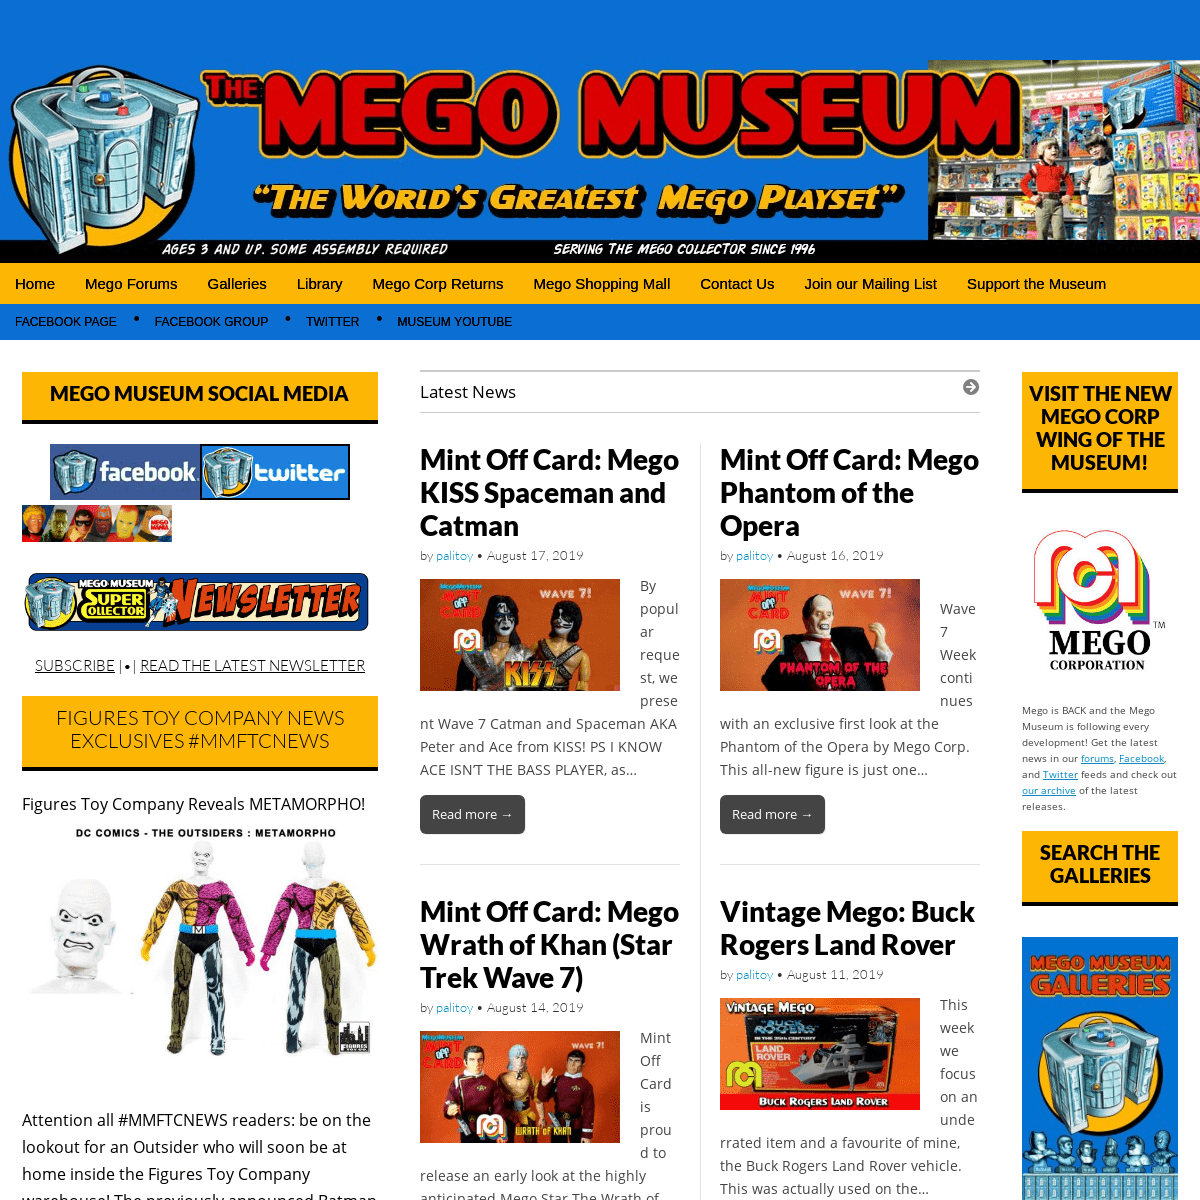 Mego Museum – Preserving Mego history today, making Mego history tomorrow.